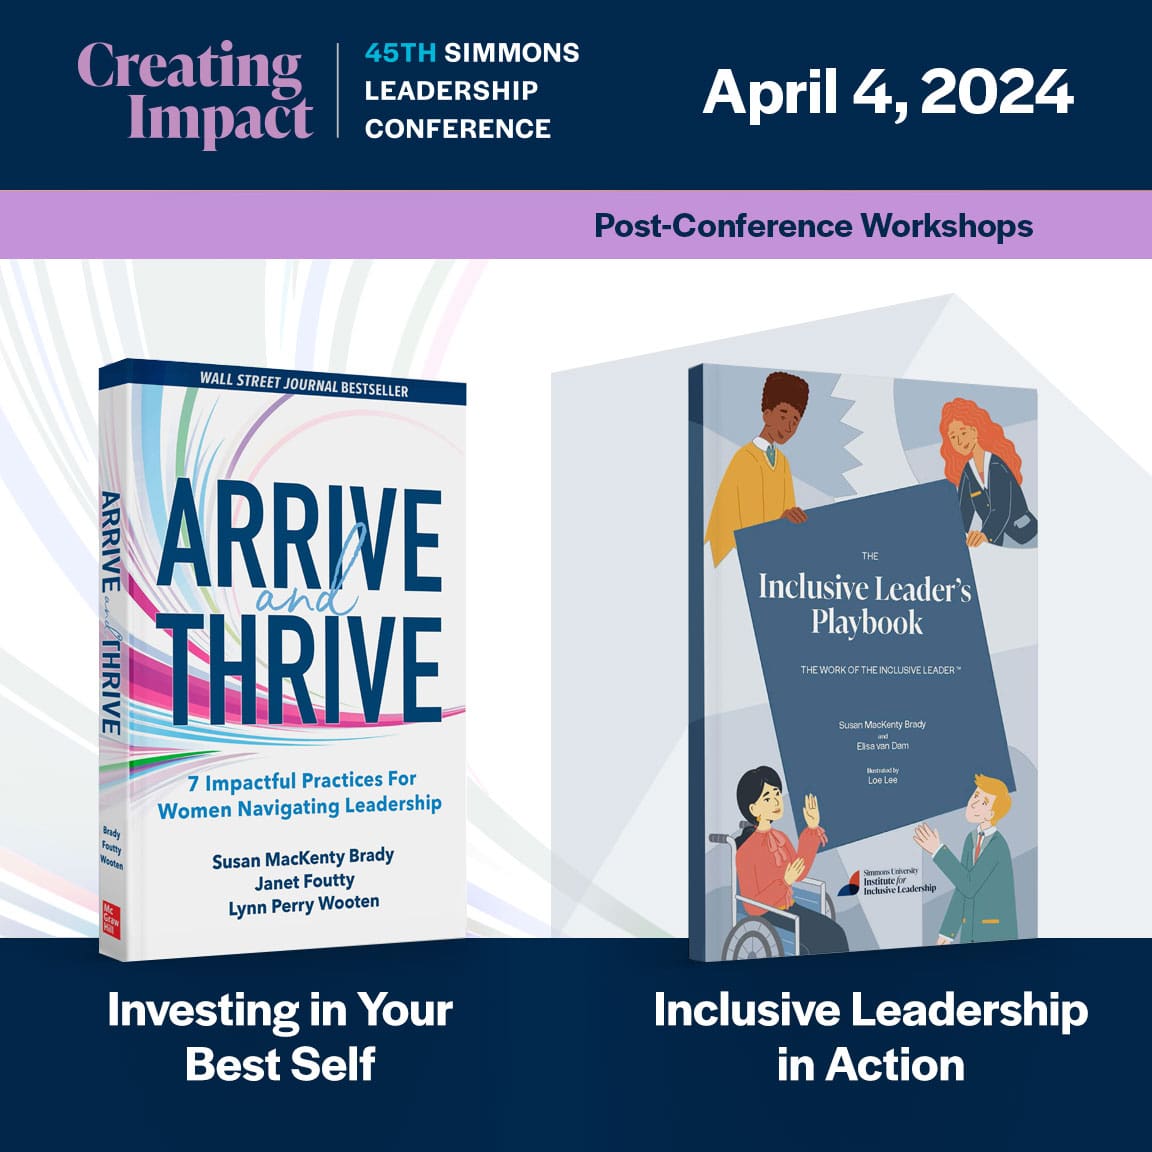 arrive and thrive and inclusive leaders playbook book covers